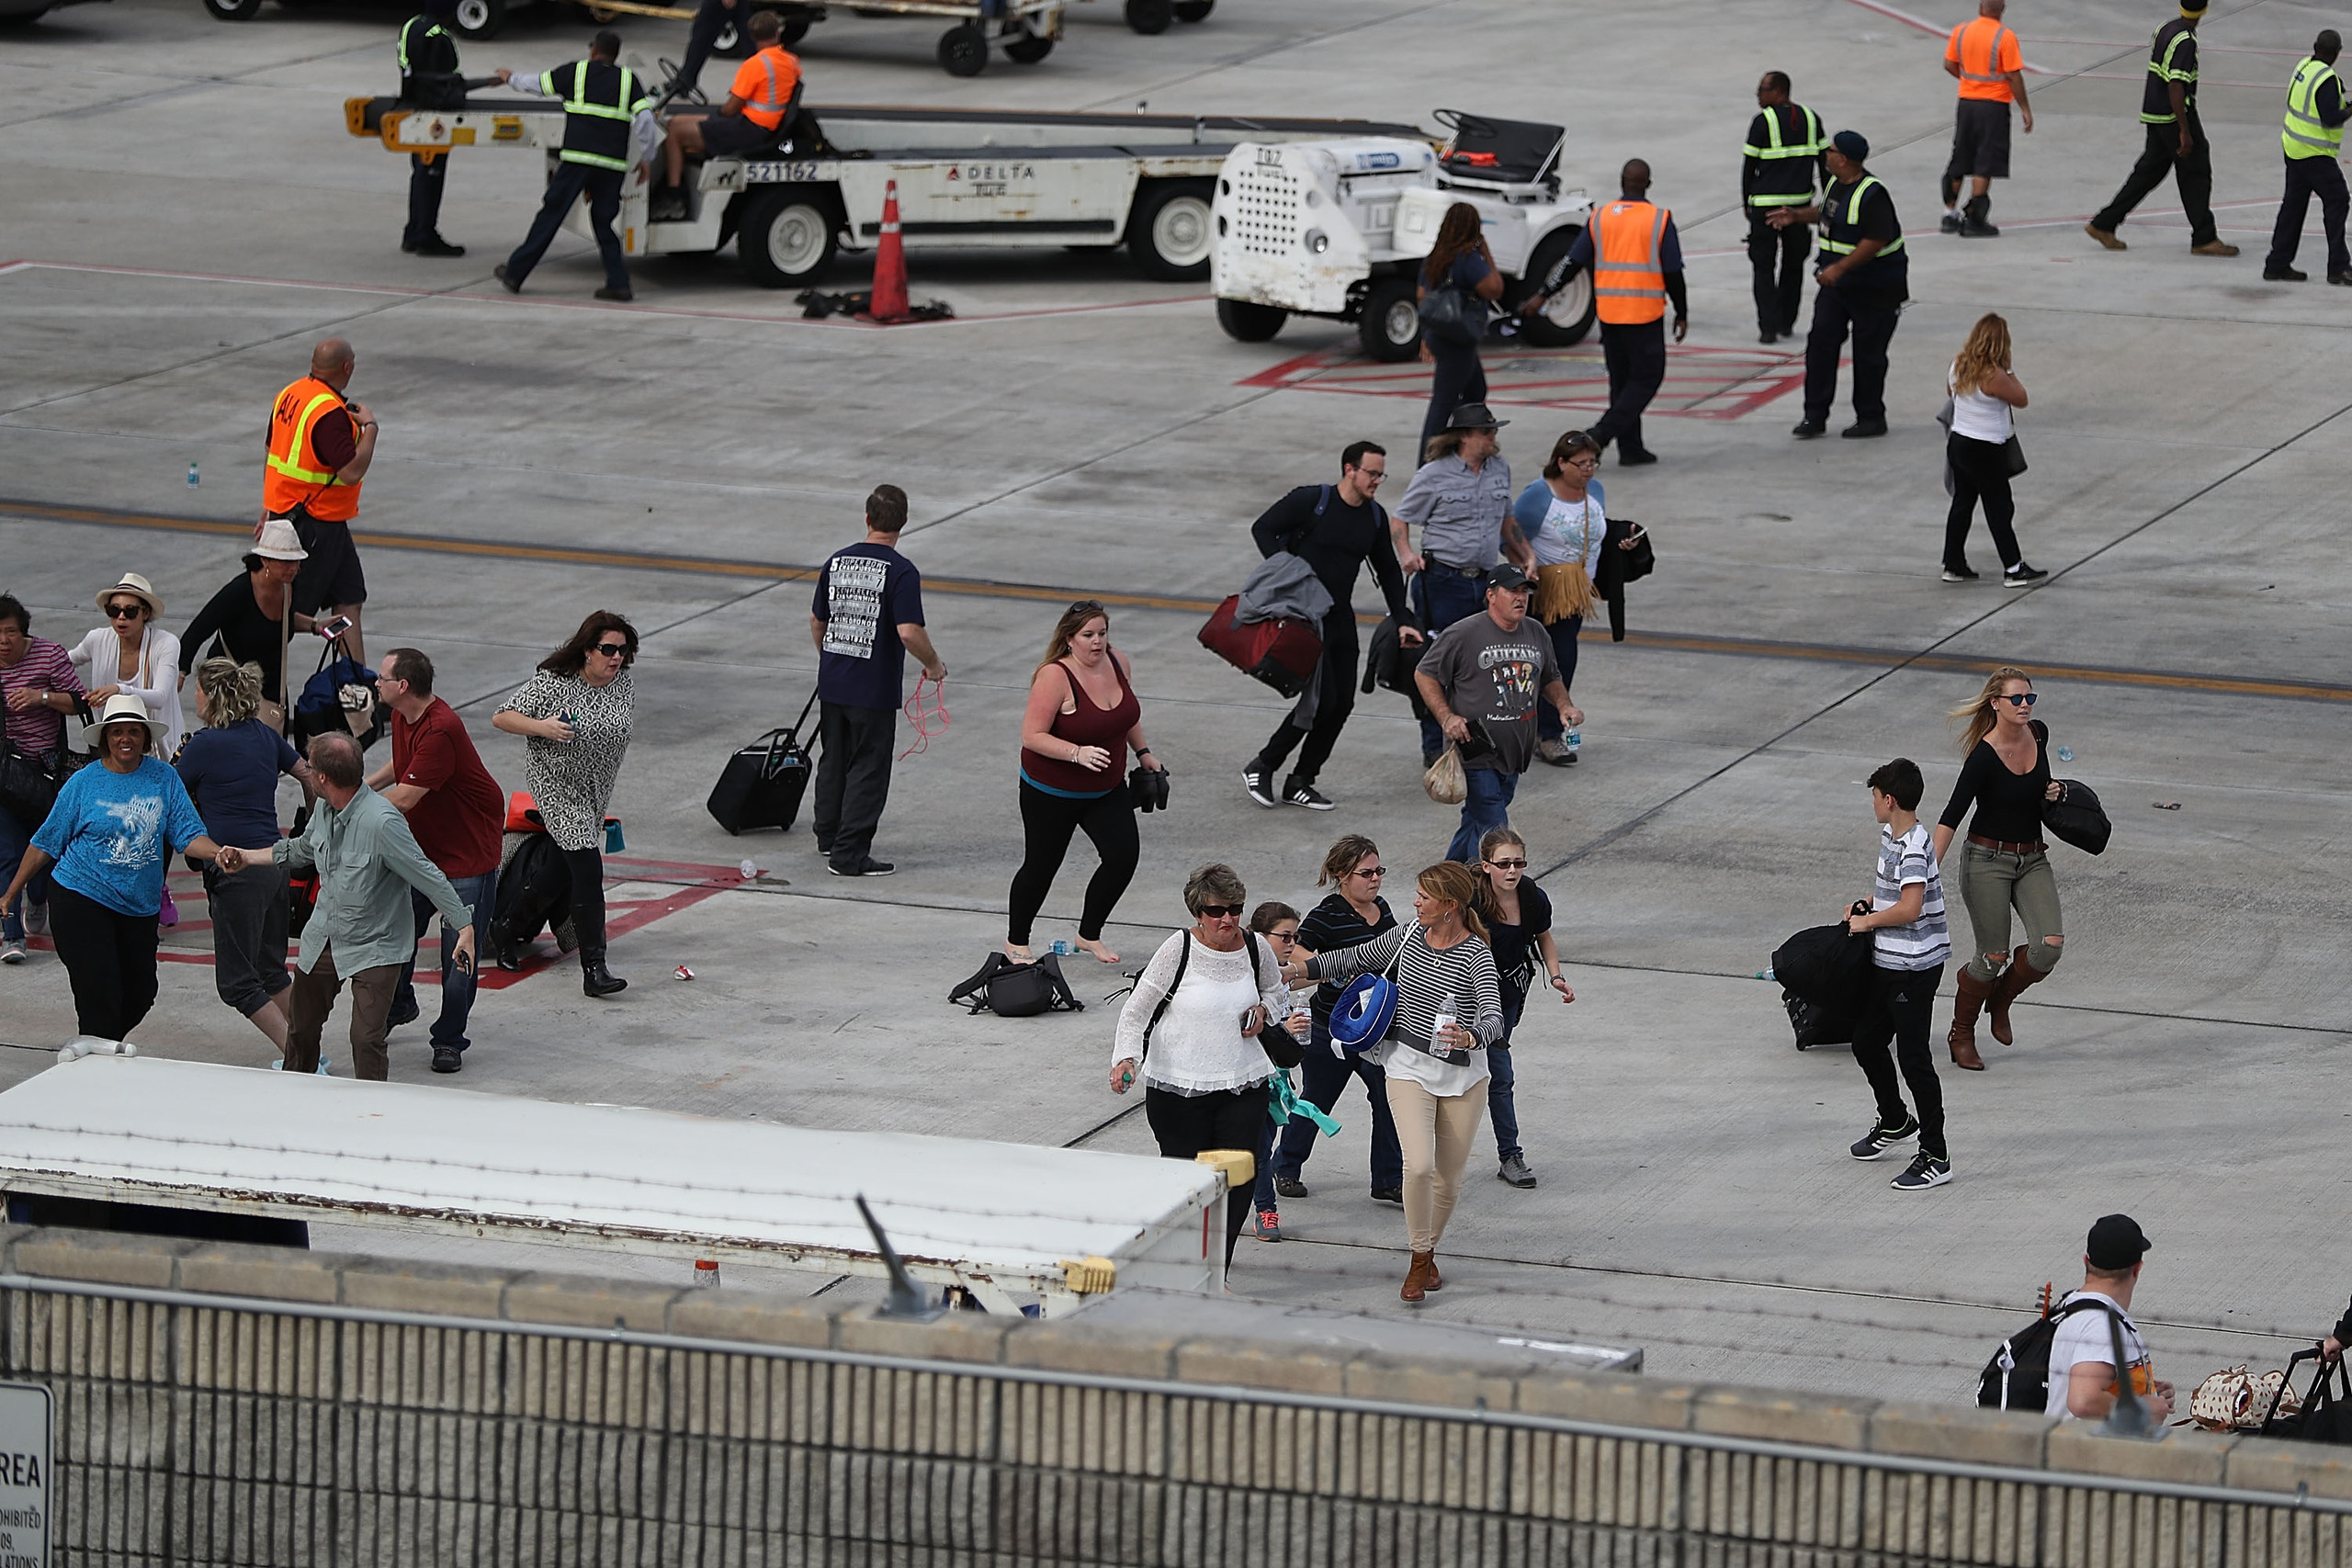 FORT LAUDERDALE, FL - JANUARY 06: People seek cover on the tarmac of Fort Lauderdale-Hollywood International airport after a shooting took place near the baggage claim on January 6, 2017 in Fort Lauderdale, Florida. Officials are reporting that five people were killed and eight wounded in an attack by a single gunman. Joe Raedle/Getty Images/AFP